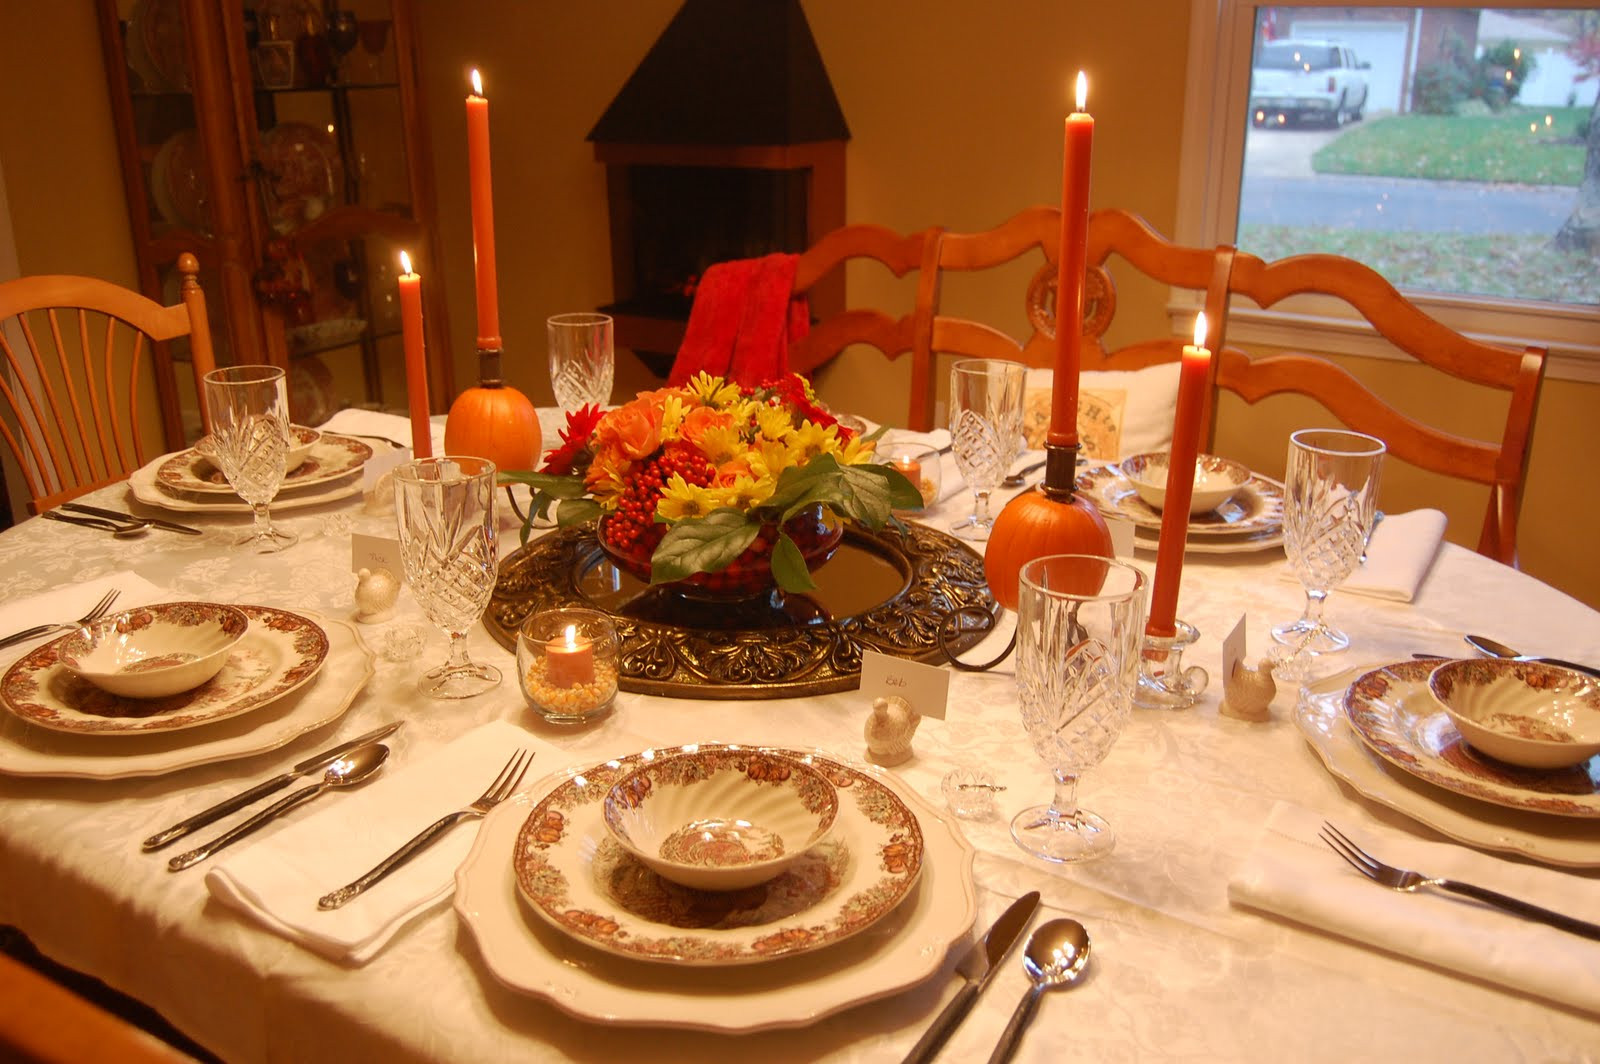 Thanksgiving Dinner Table Decorations
 Ma Maison Thanksgiving Table